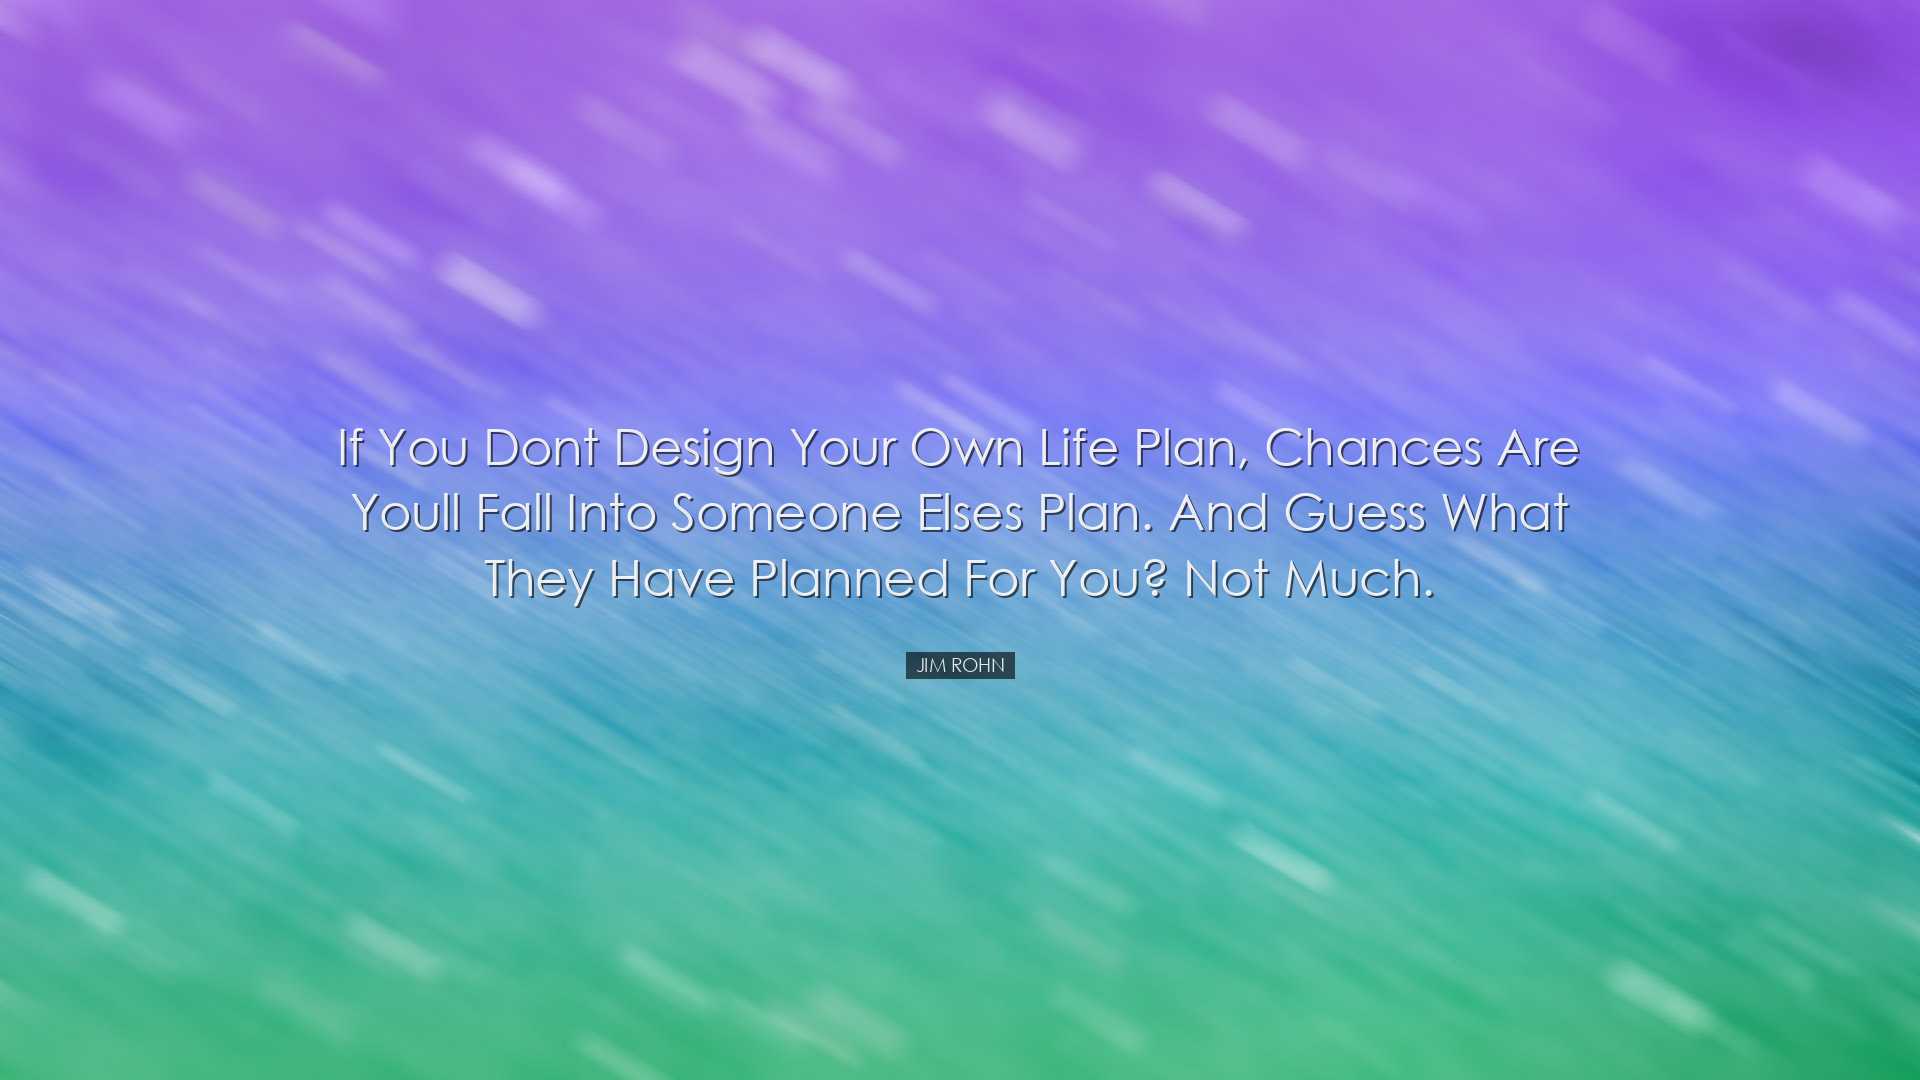 If you dont design your own life plan, chances are youll fall into